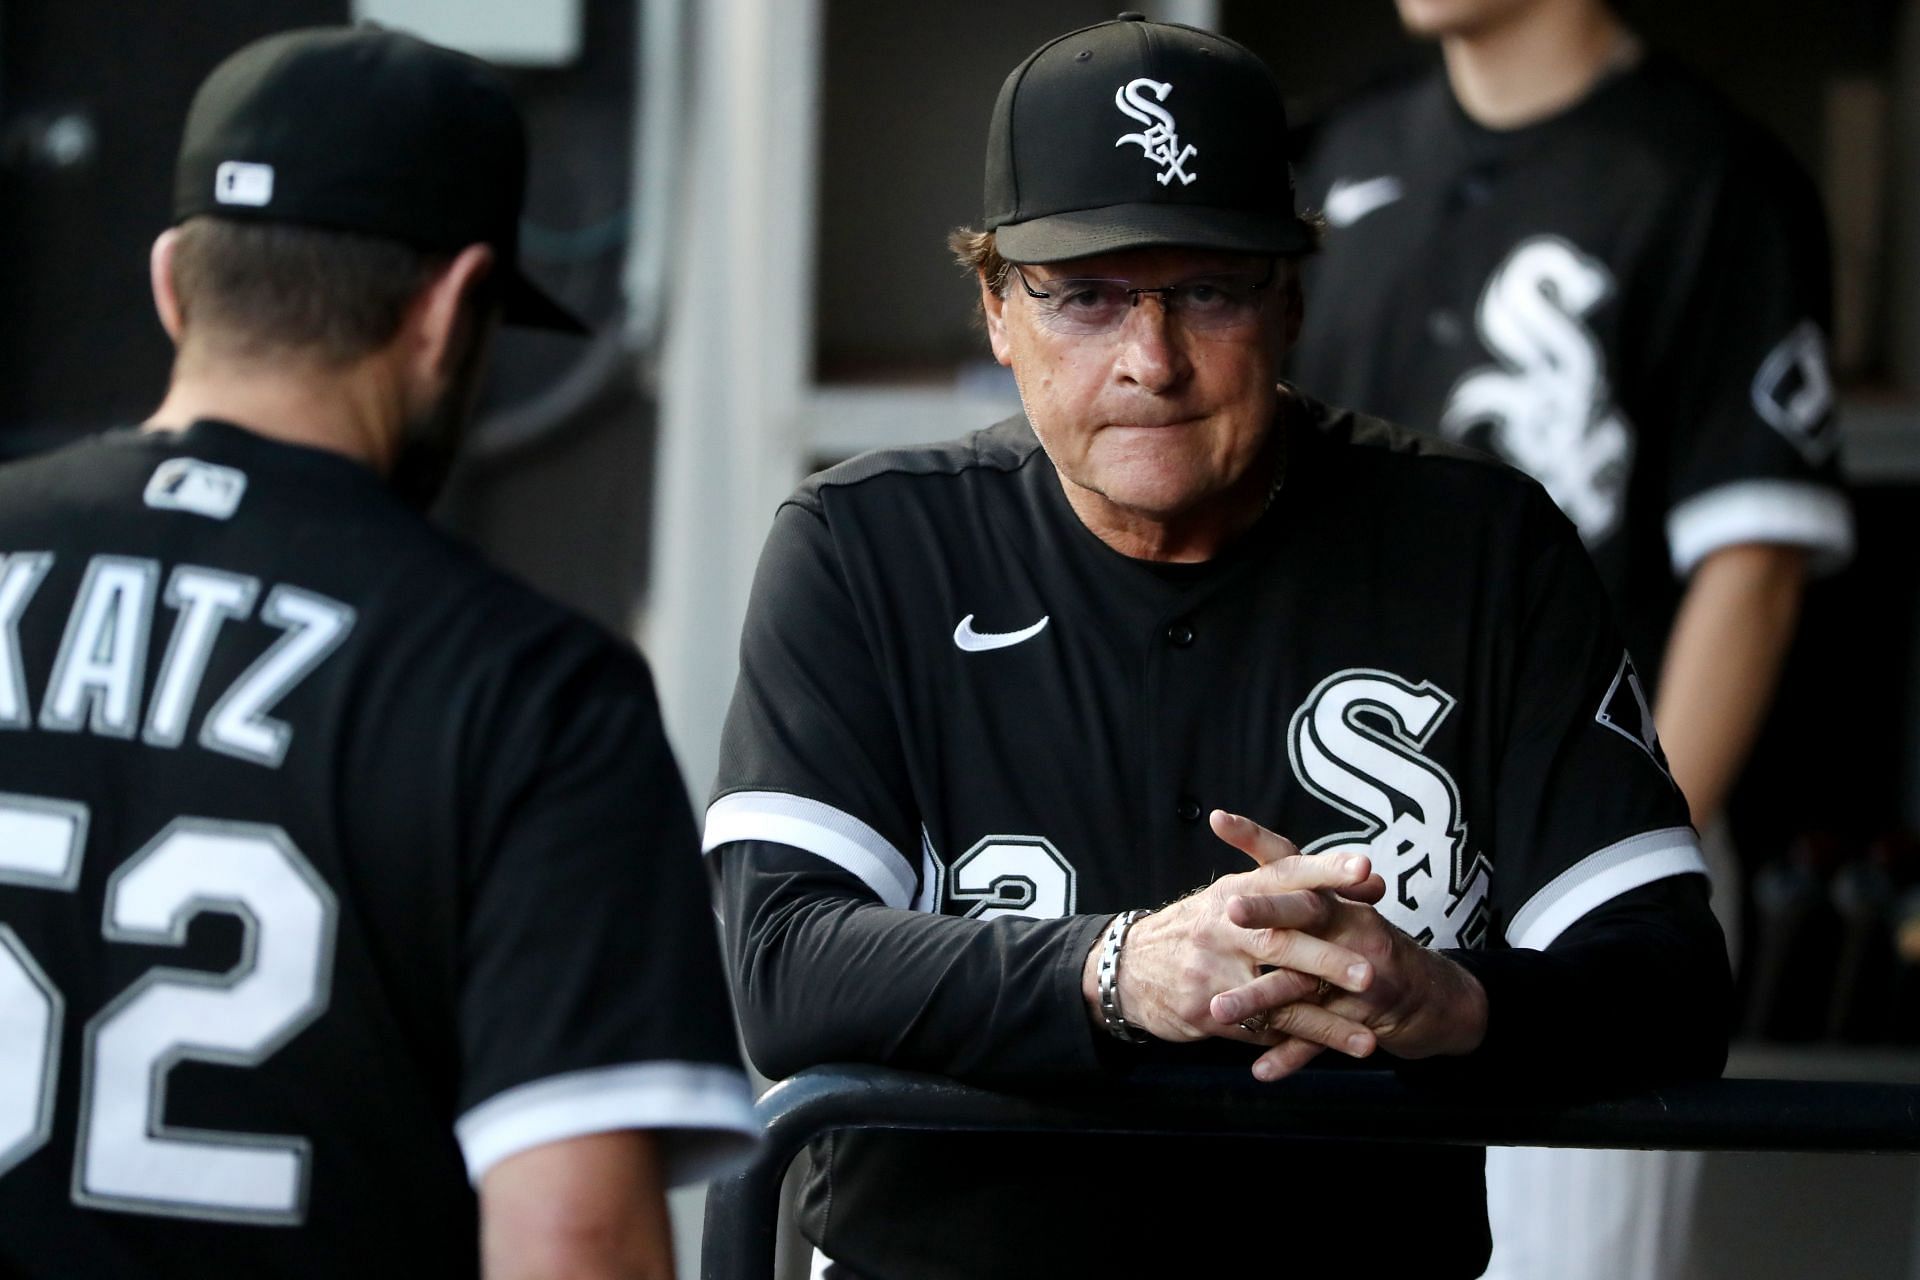 Tony La Russa expected to announce retirement as White Sox manager